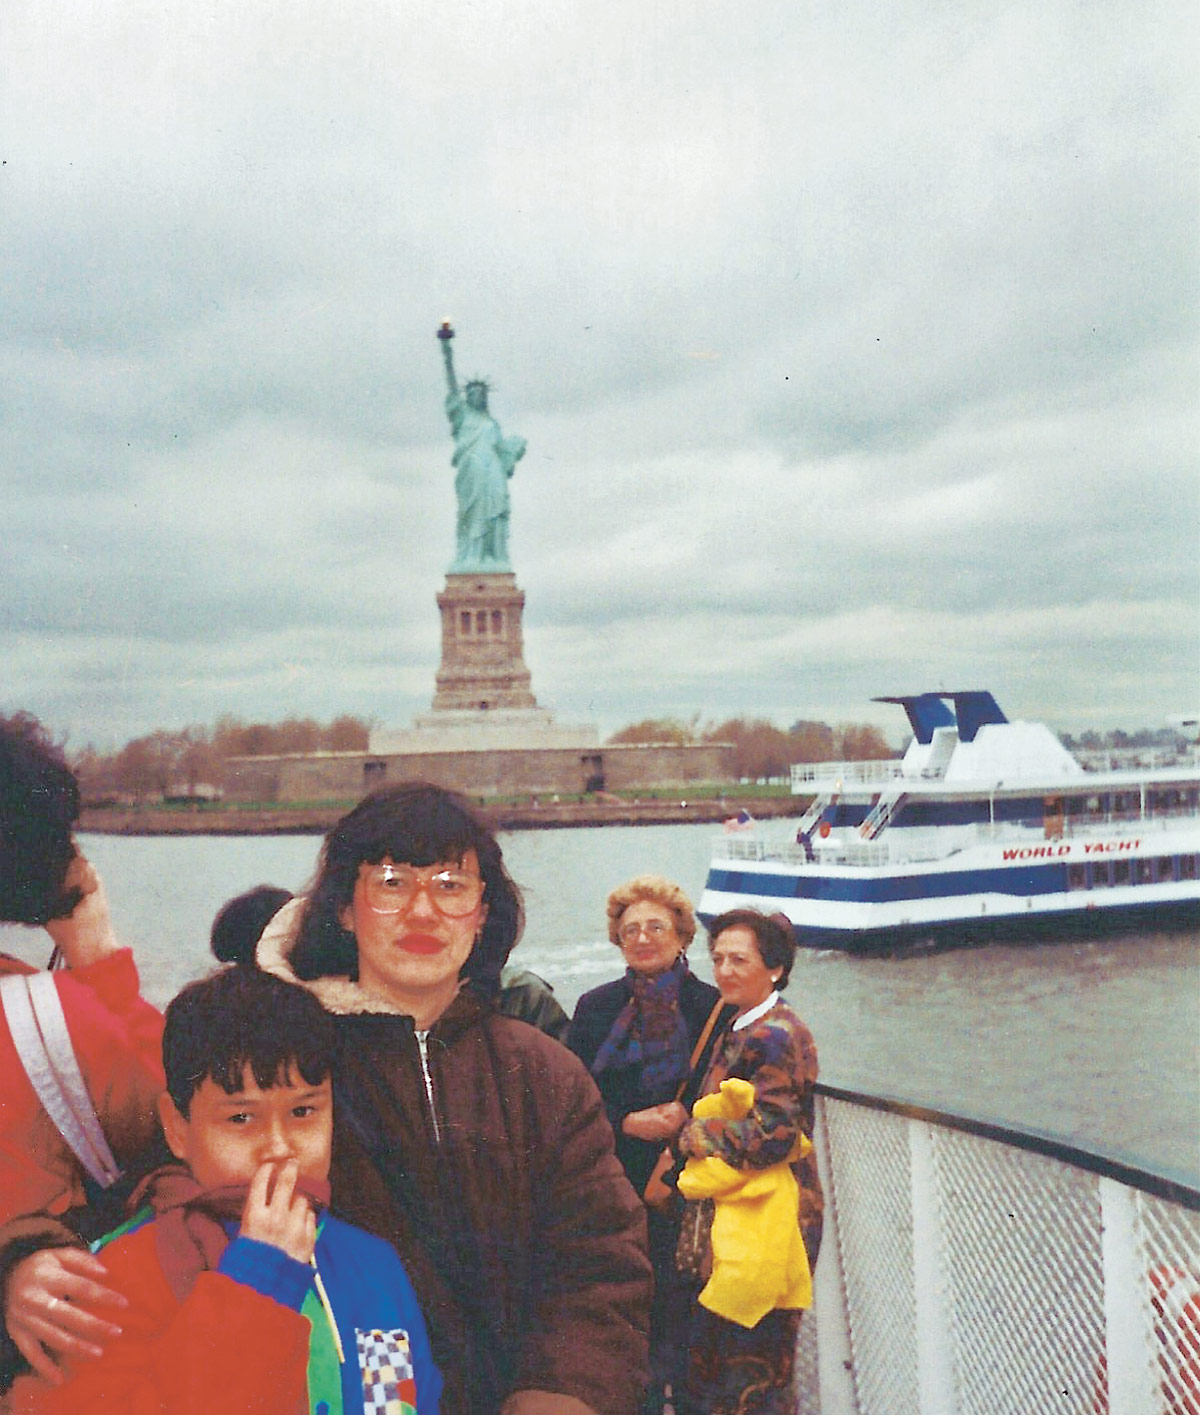 Childhood photo of Jorge Aguilar and his mother Denia Ching posing with the Statue of Liberty in the background